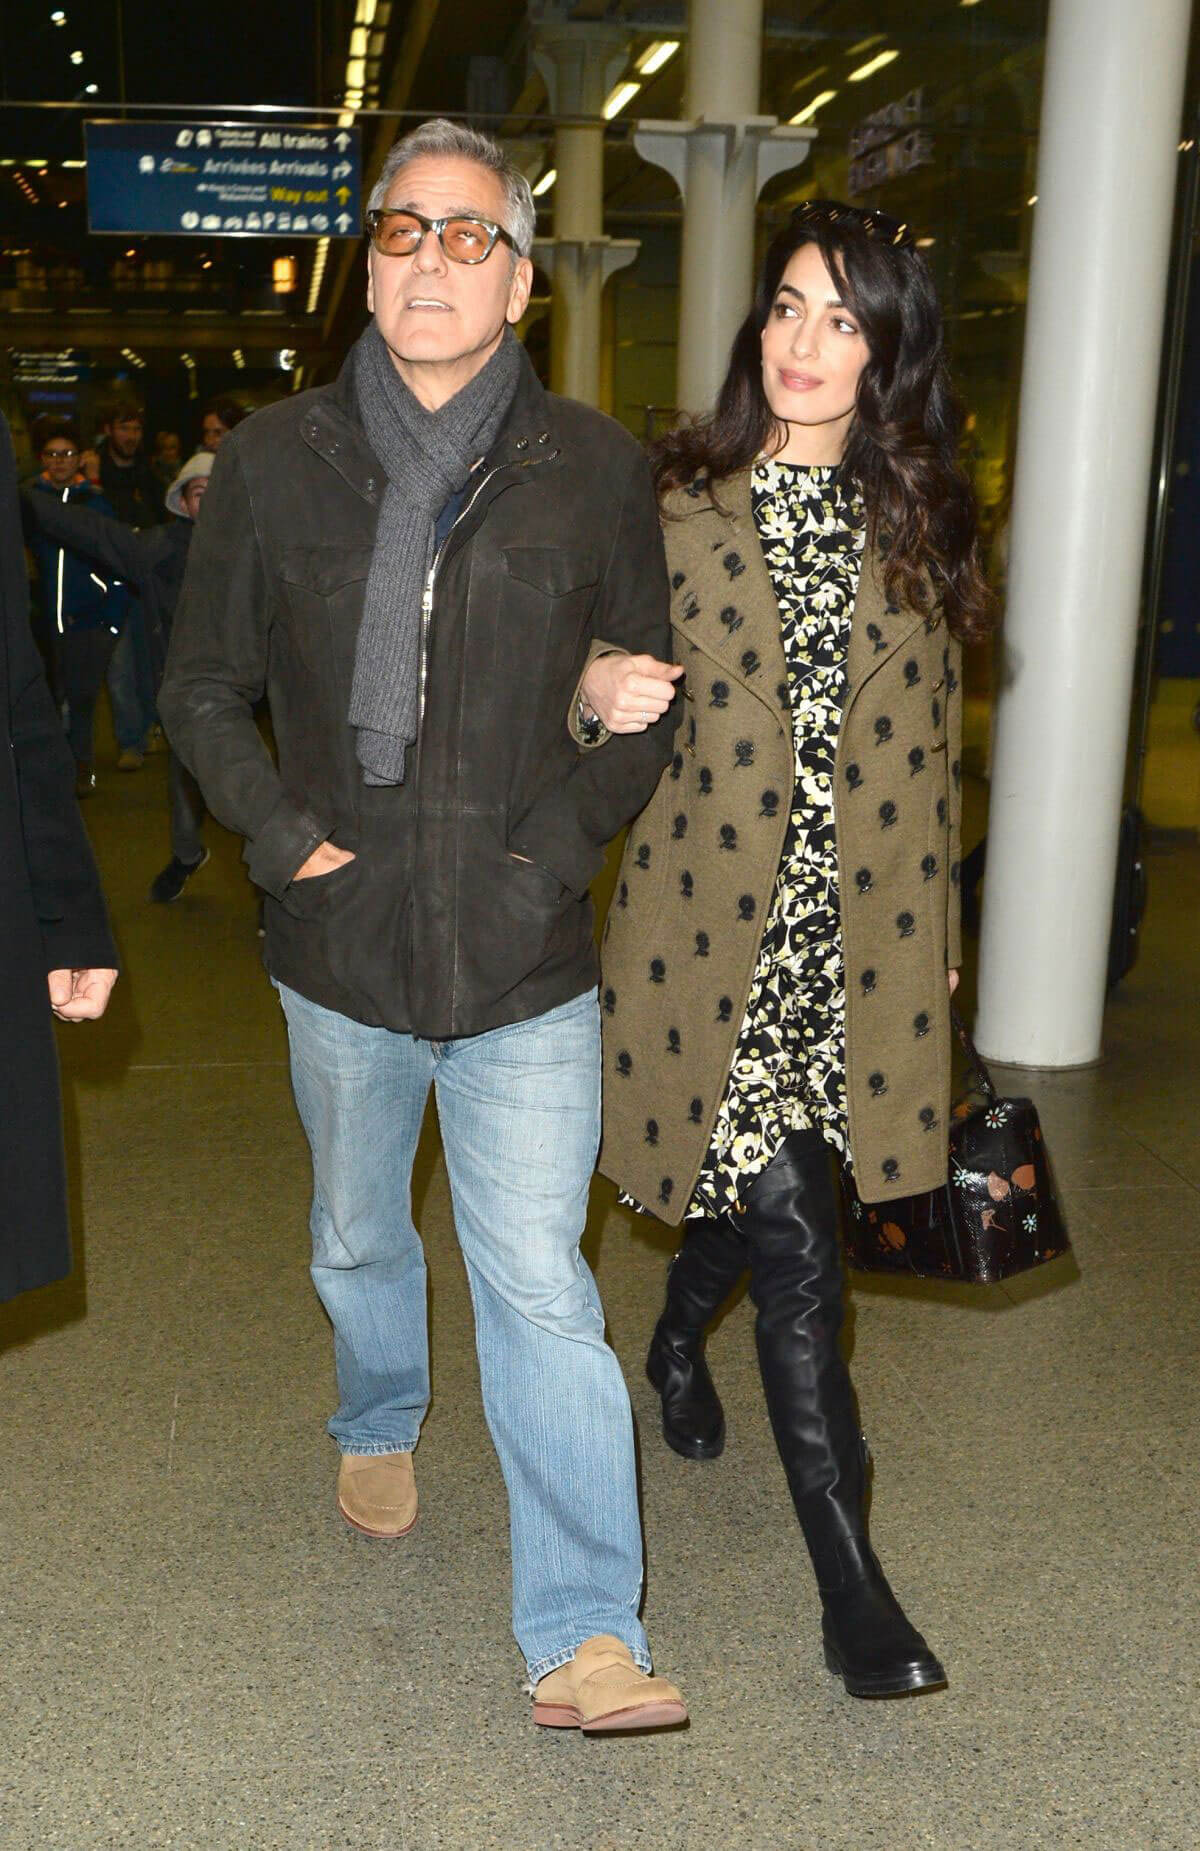 Amal Clooney and George Clooney at St Pancras Eurostar in London 4